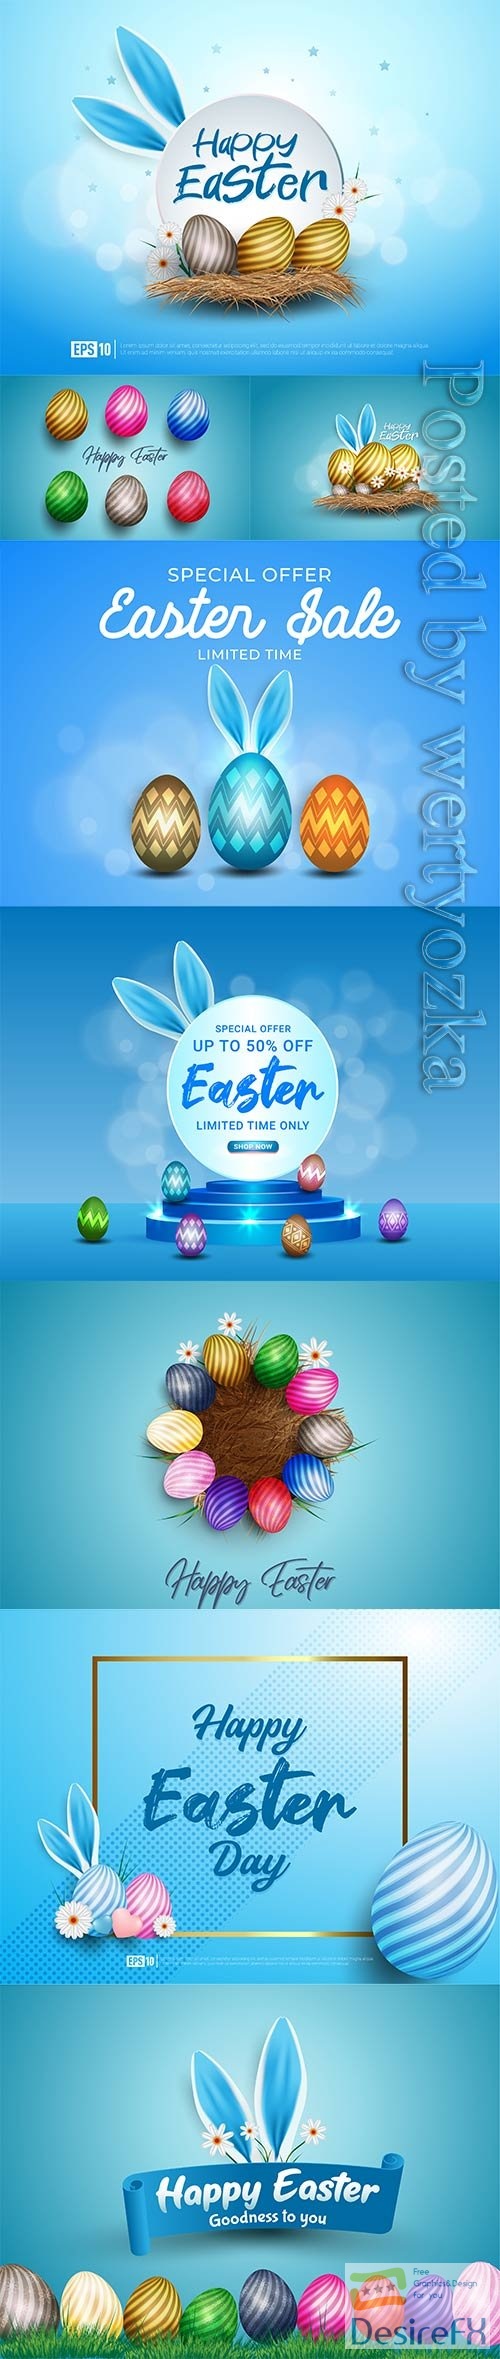 Happy easter background realistic decorated bunny ears and easter eggs